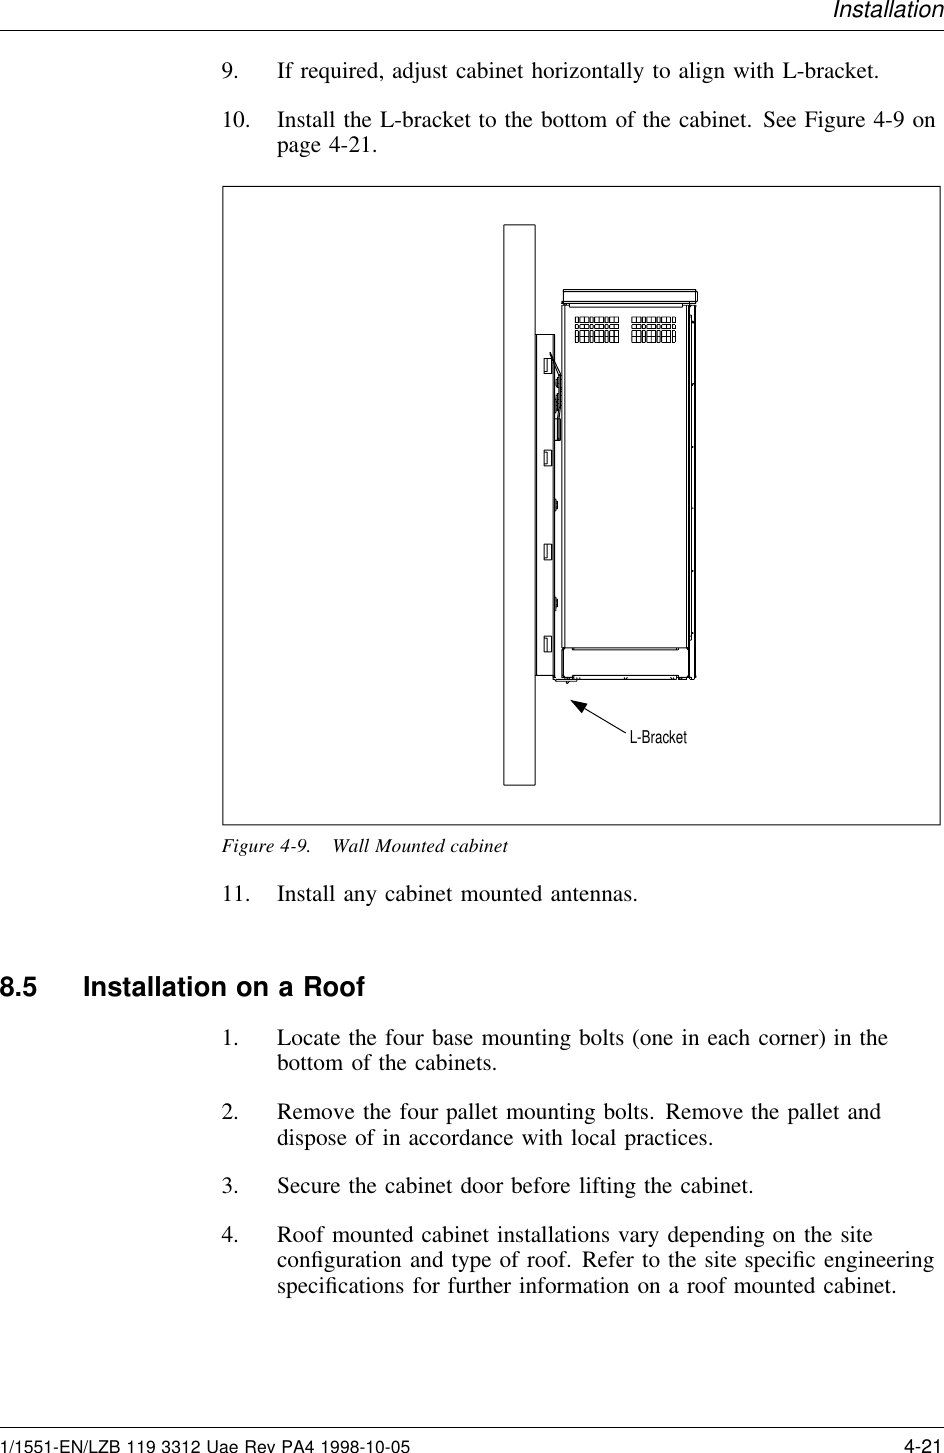 Installation9. If required, adjust cabinet horizontally to align with L-bracket.10. Install the L-bracket to the bottom of the cabinet. See Figure 4-9 onpage 4-21.L-BracketFigure 4-9. Wall Mounted cabinet11. Install any cabinet mounted antennas.8.5 Installation on a Roof1. Locate the four base mounting bolts (one in each corner) in thebottom of the cabinets.2. Remove the four pallet mounting bolts. Remove the pallet anddispose of in accordance with local practices.3. Secure the cabinet door before lifting the cabinet.4. Roof mounted cabinet installations vary depending on the siteconﬁguration and type of roof. Refer to the site speciﬁc engineeringspeciﬁcations for further information on a roof mounted cabinet.1/1551-EN/LZB 119 3312 Uae Rev PA4 1998-10-05 4-21